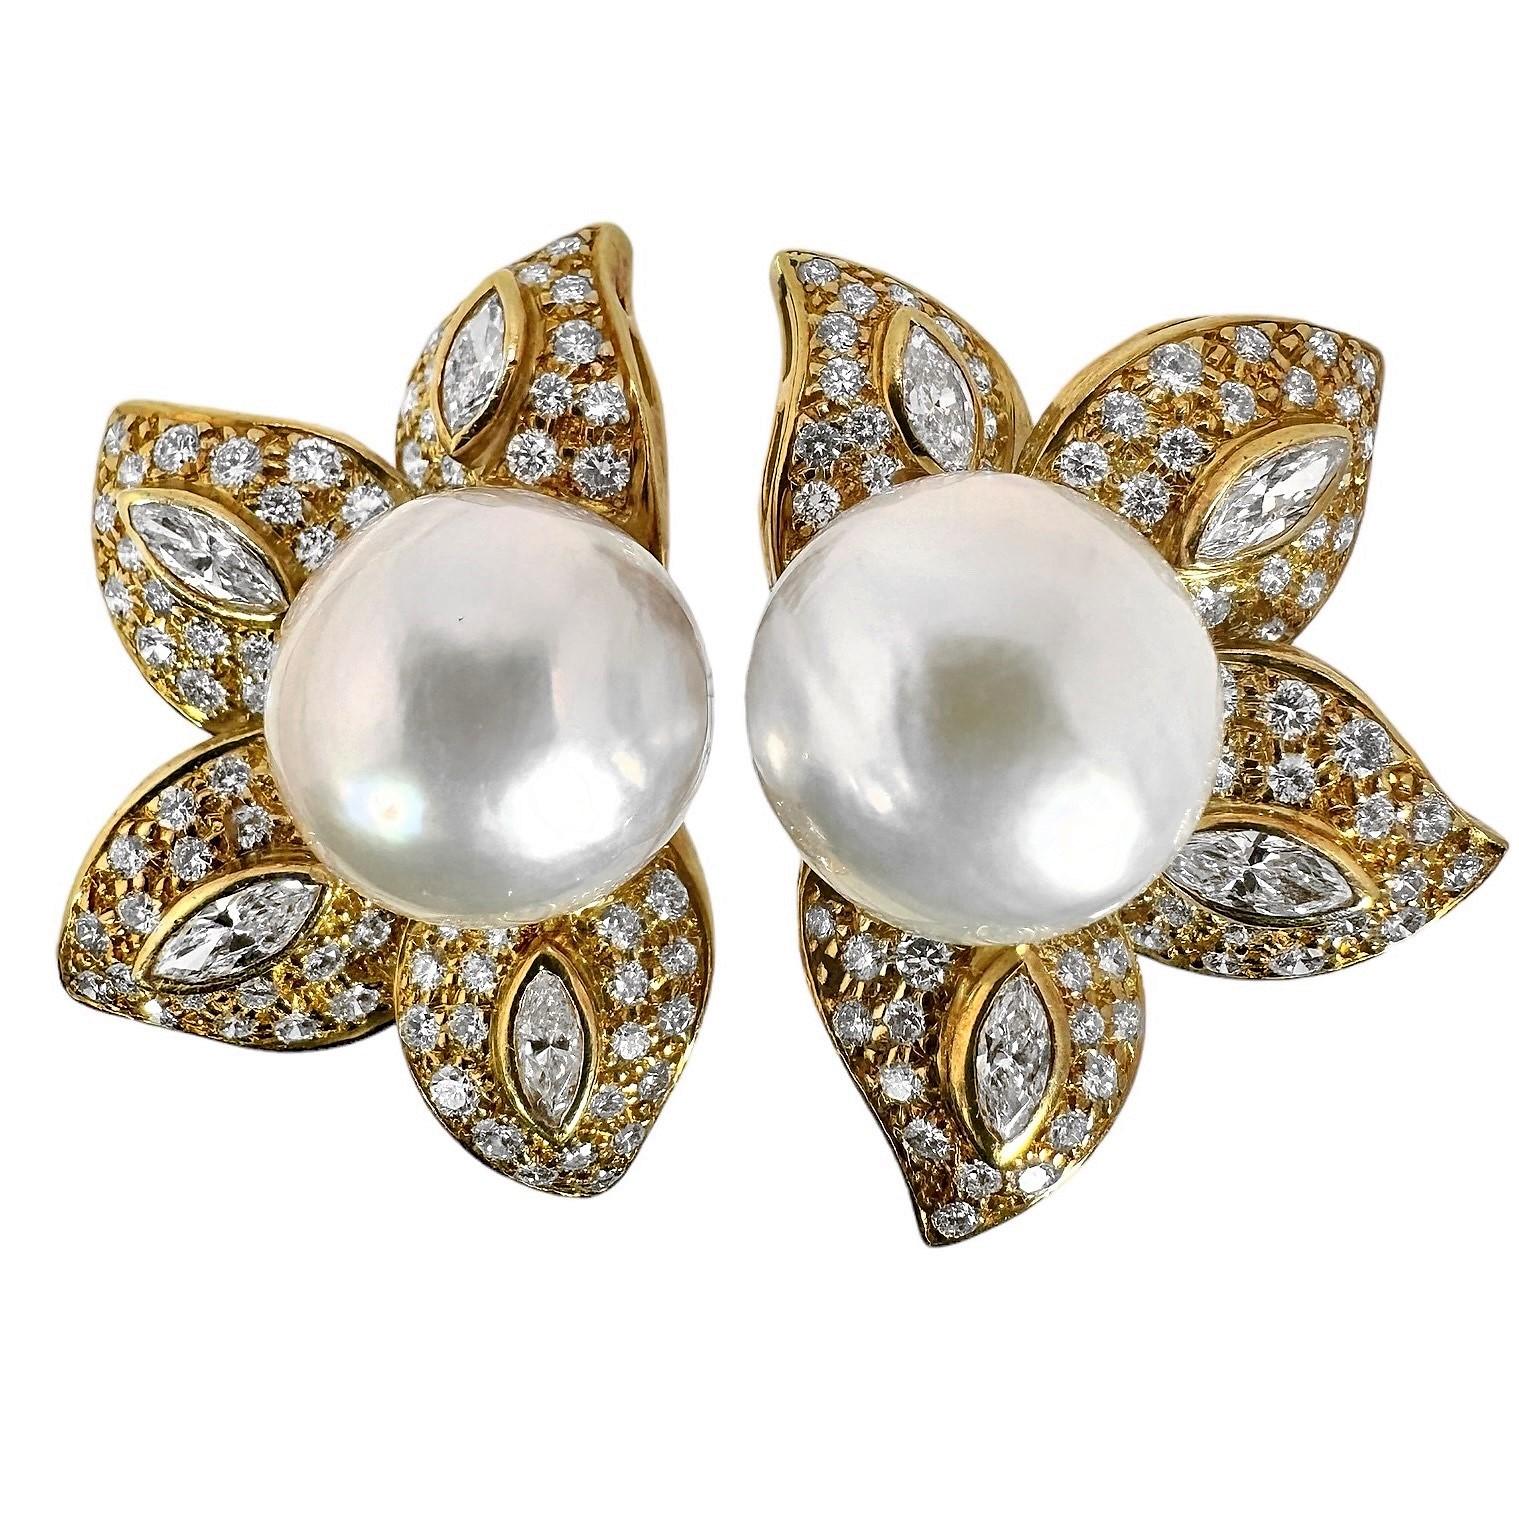 This stylish and feminine pair of Mid-20th Century floral motif earrings are set very liberally with brilliant cut and marquise diamonds having a total approximate weight of 4.00ct and an overall quality of G color and VS1 clarity. There is a